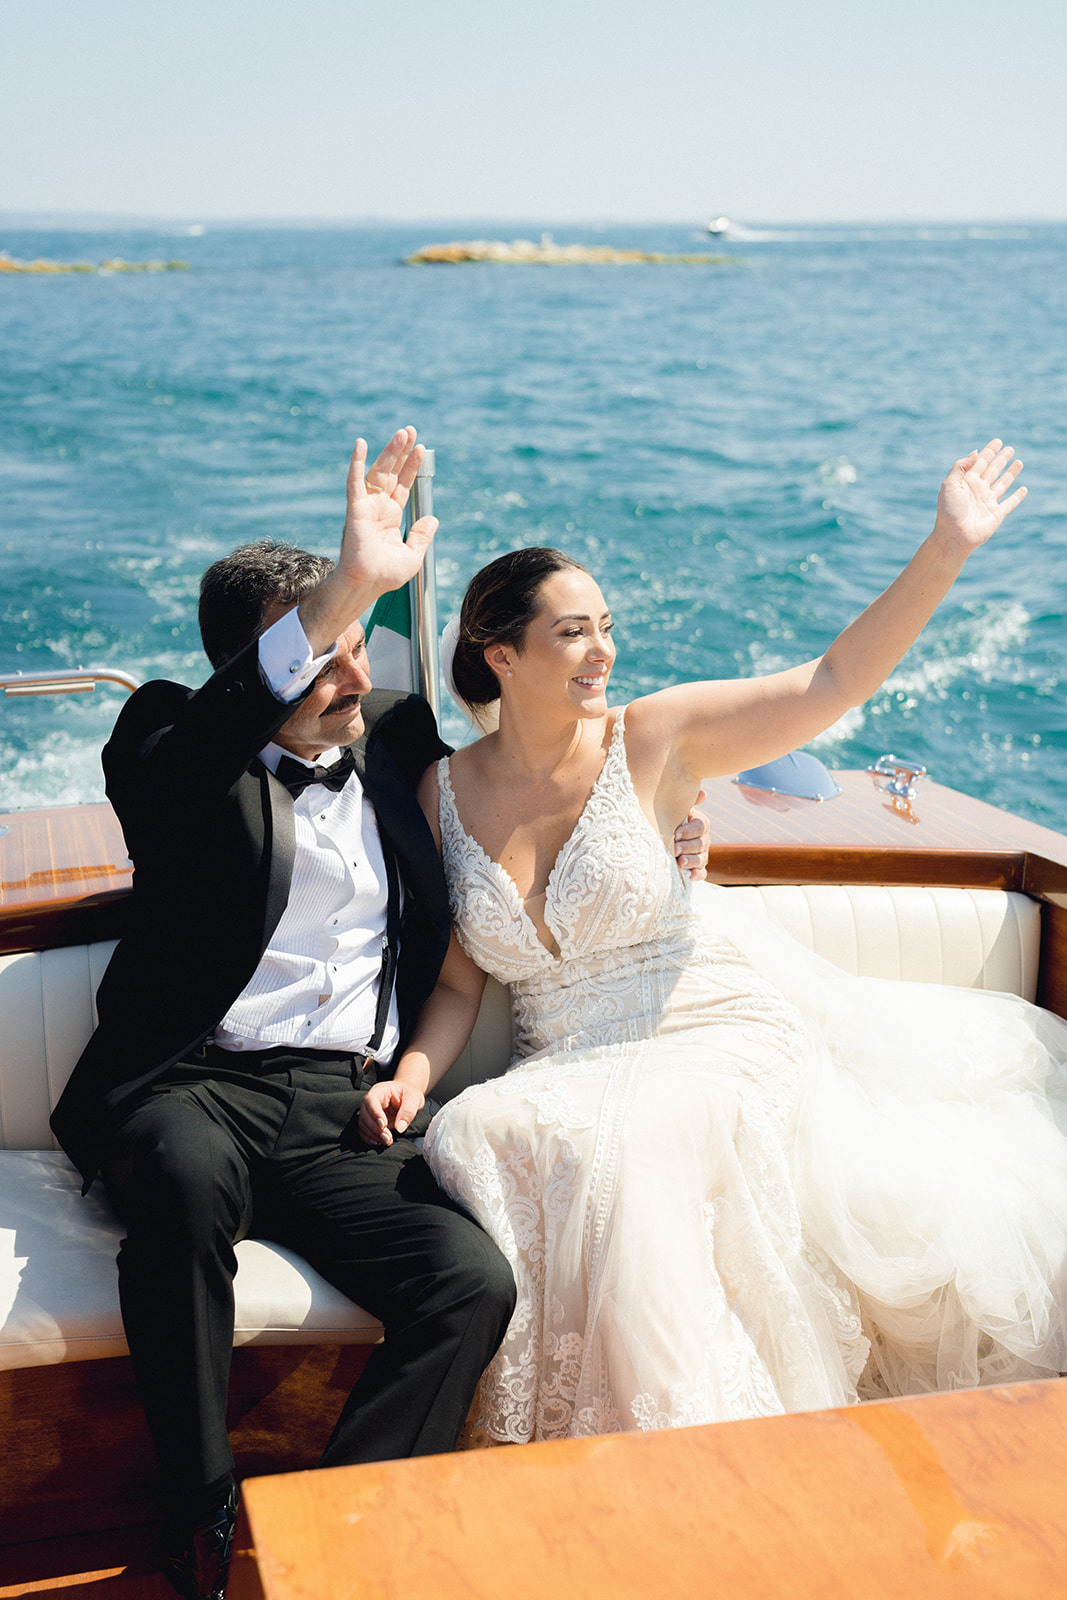 The bride and her father arrive at Isola del Garda by boat and greet the guests who see them arriving at the wedding 